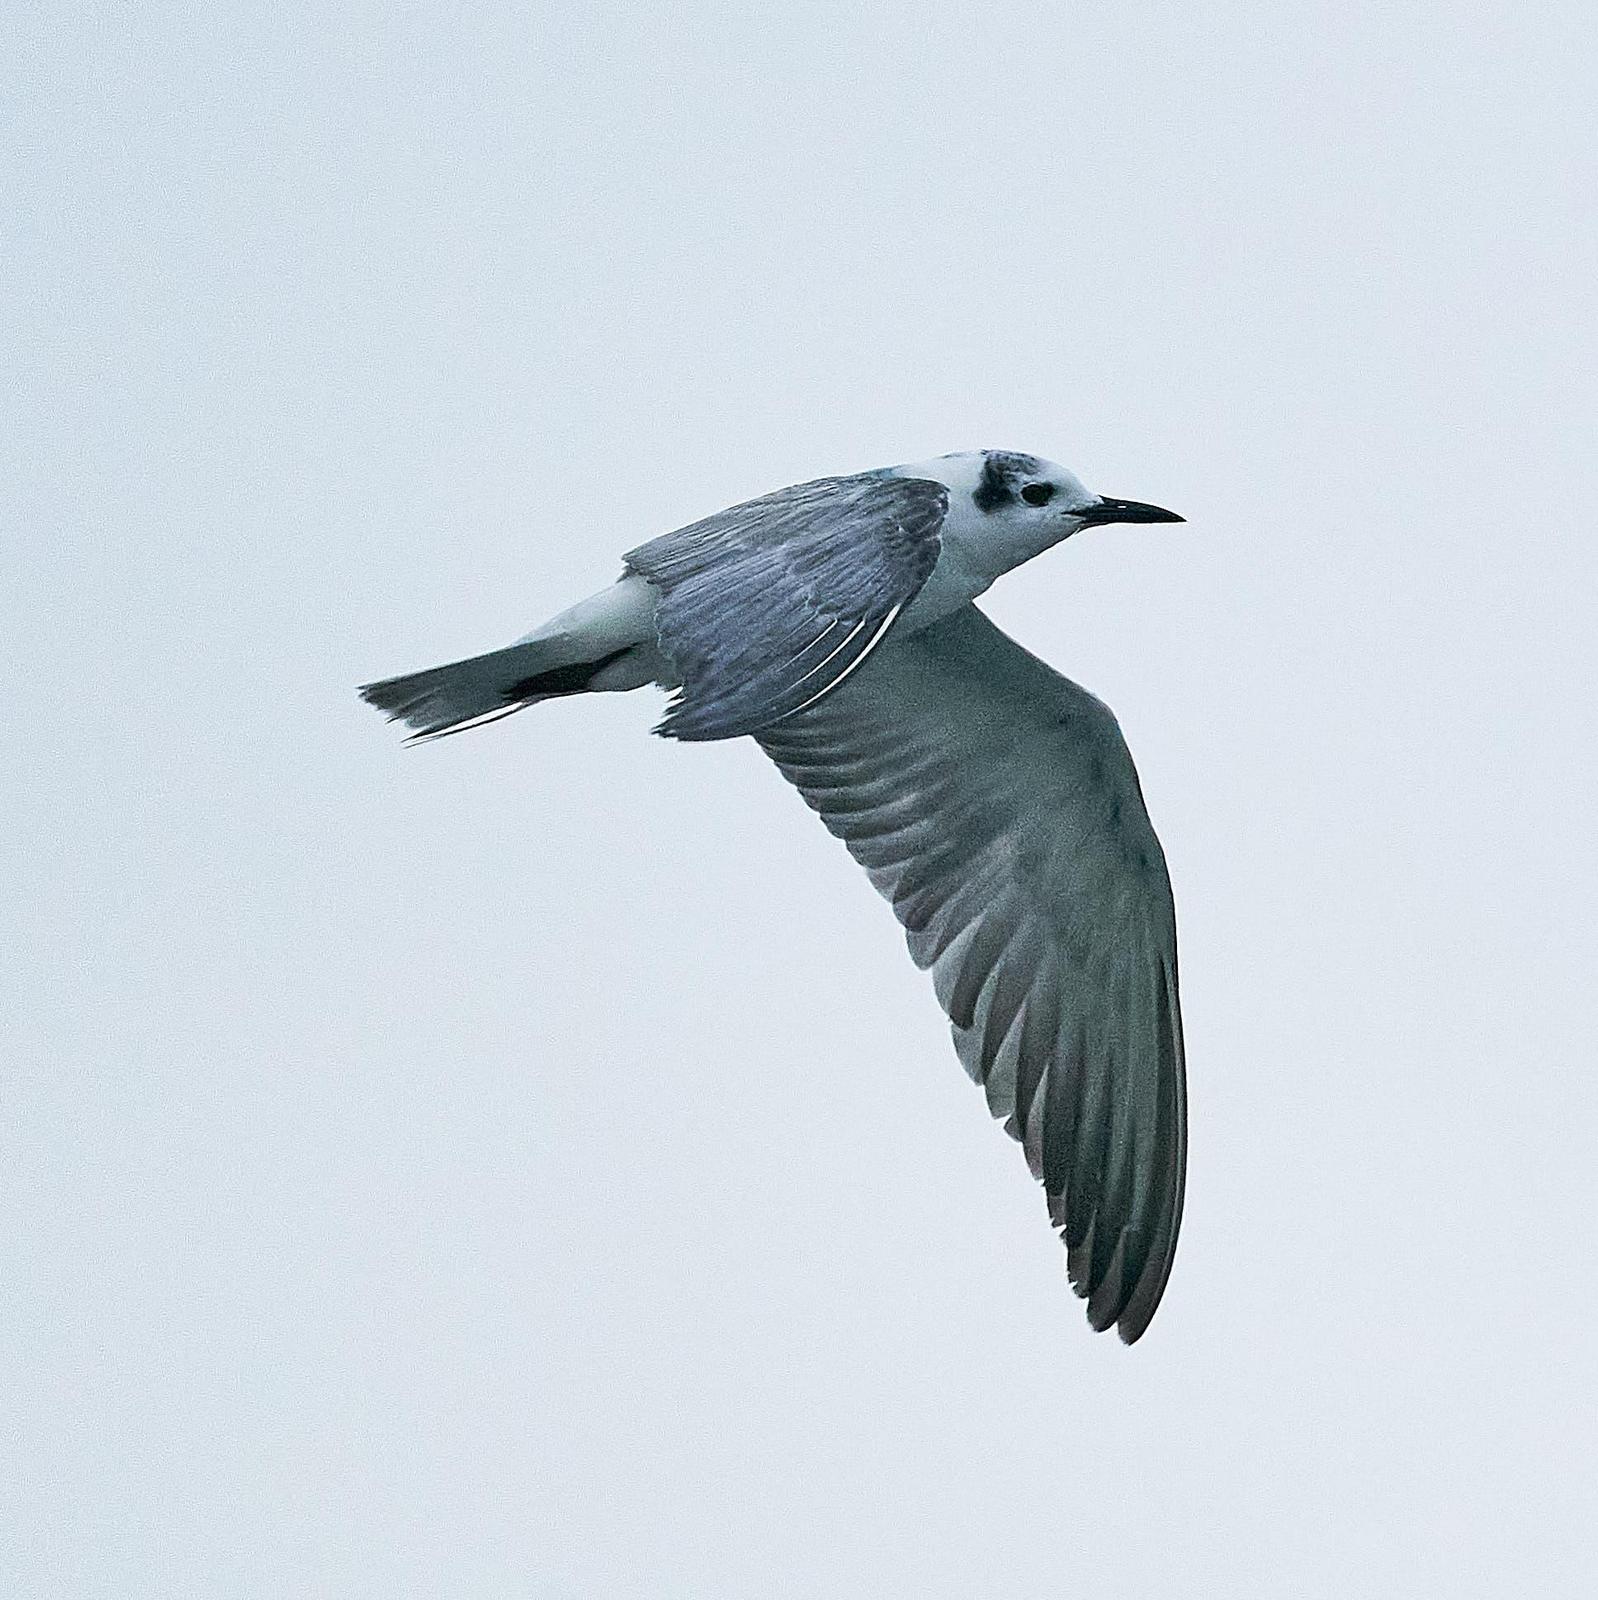 White-winged Tern Photo by Steven Cheong